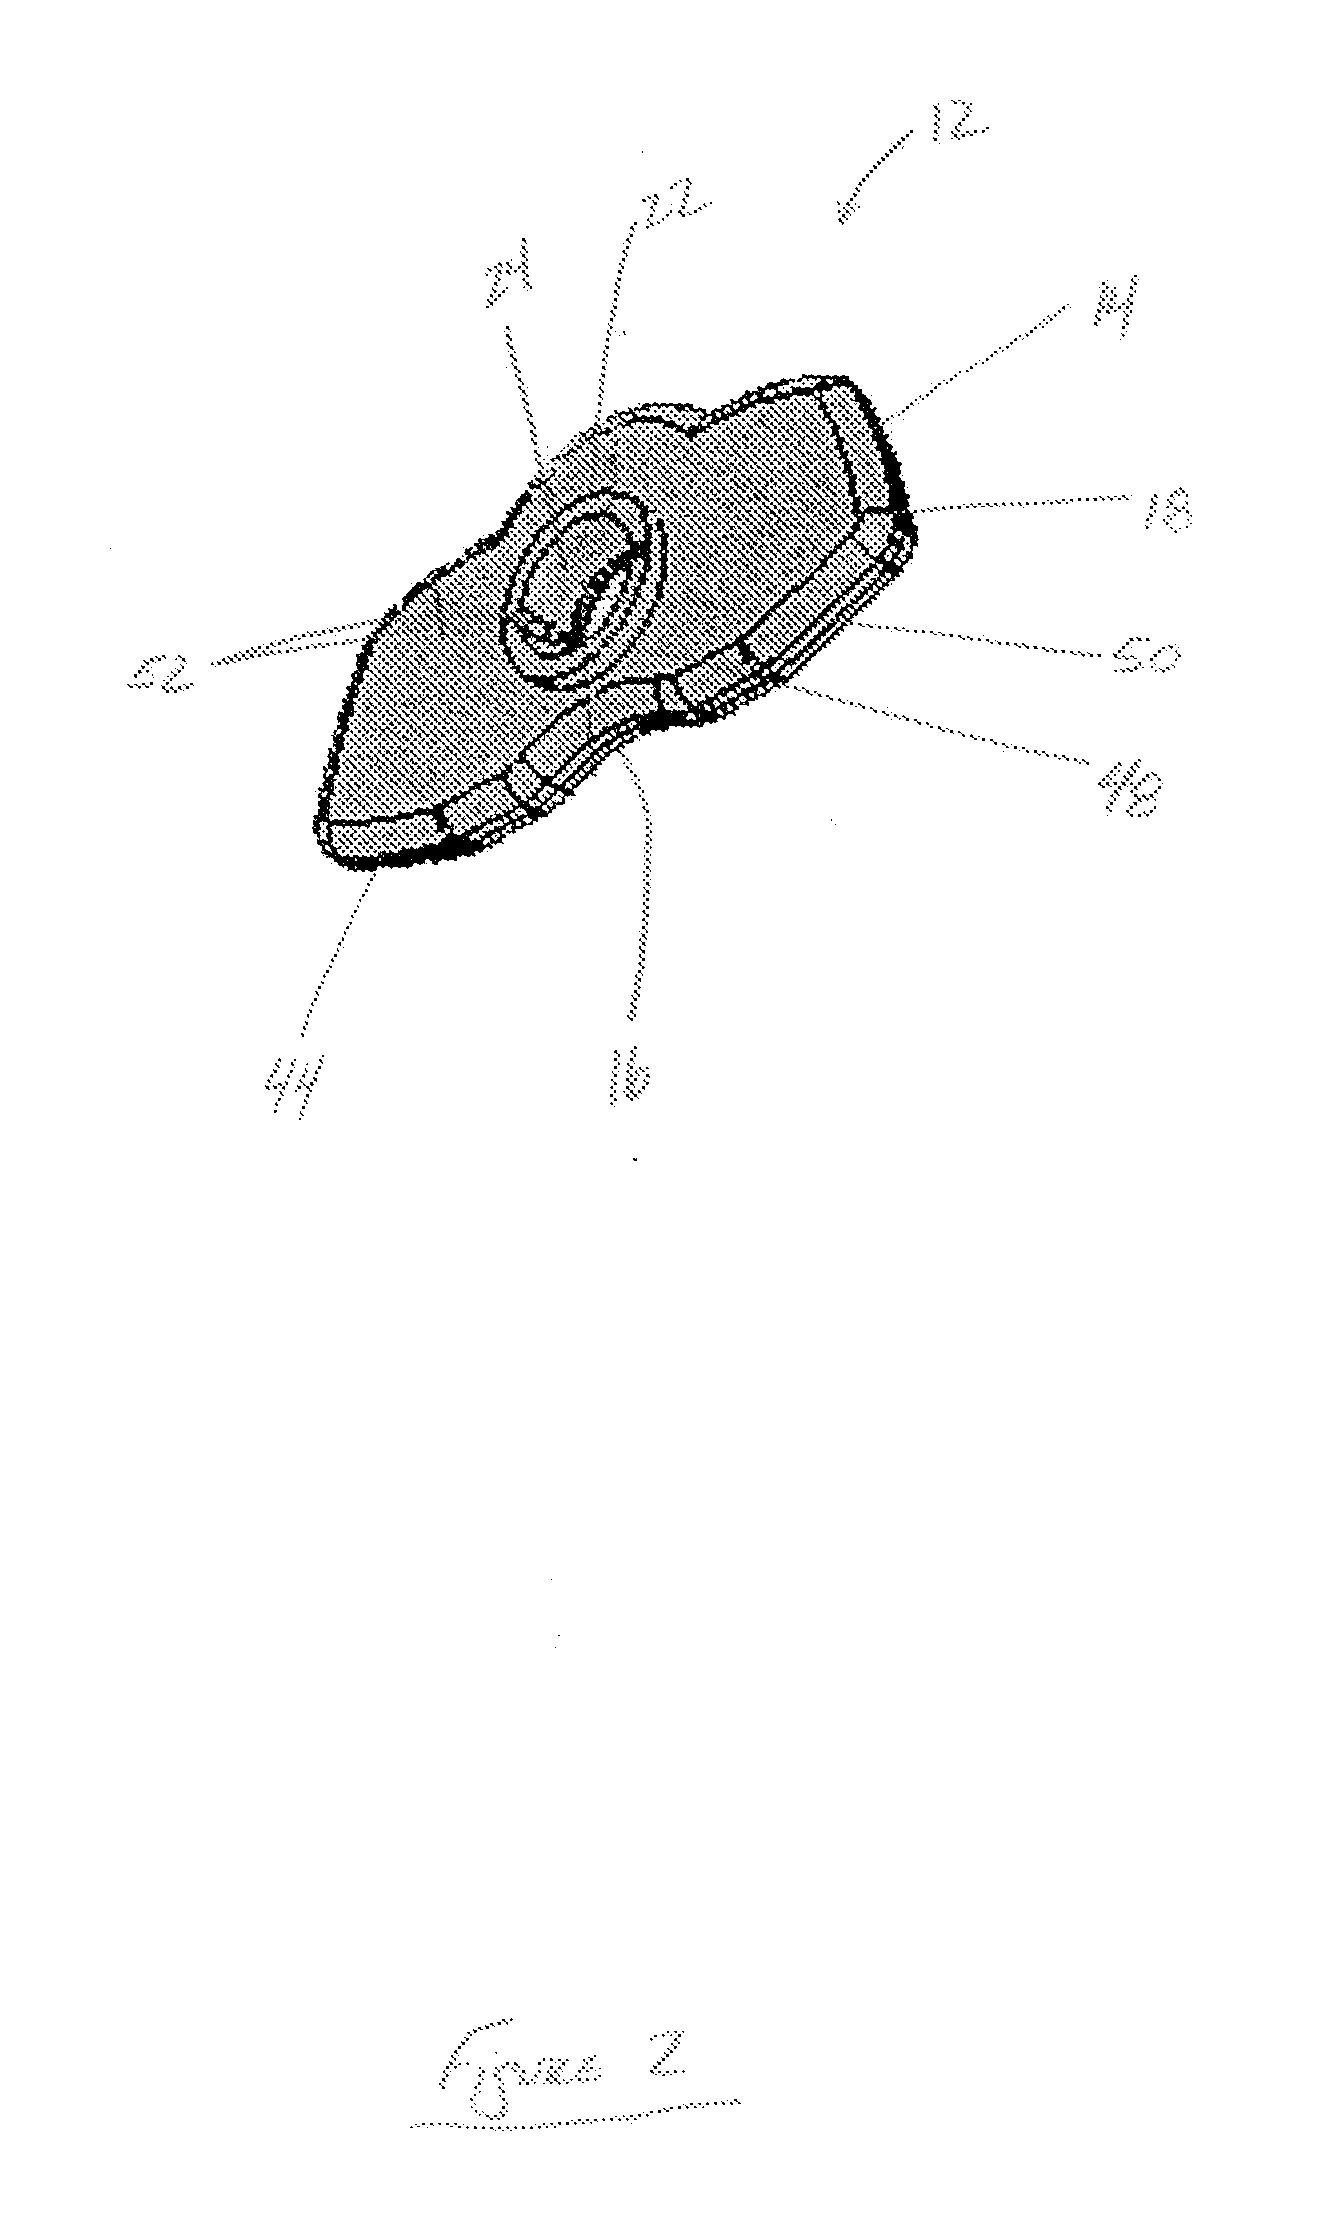 Occlusal device and method of use thereof for diagnostic evaluation of maxillomandibular relationships in edentulous patients